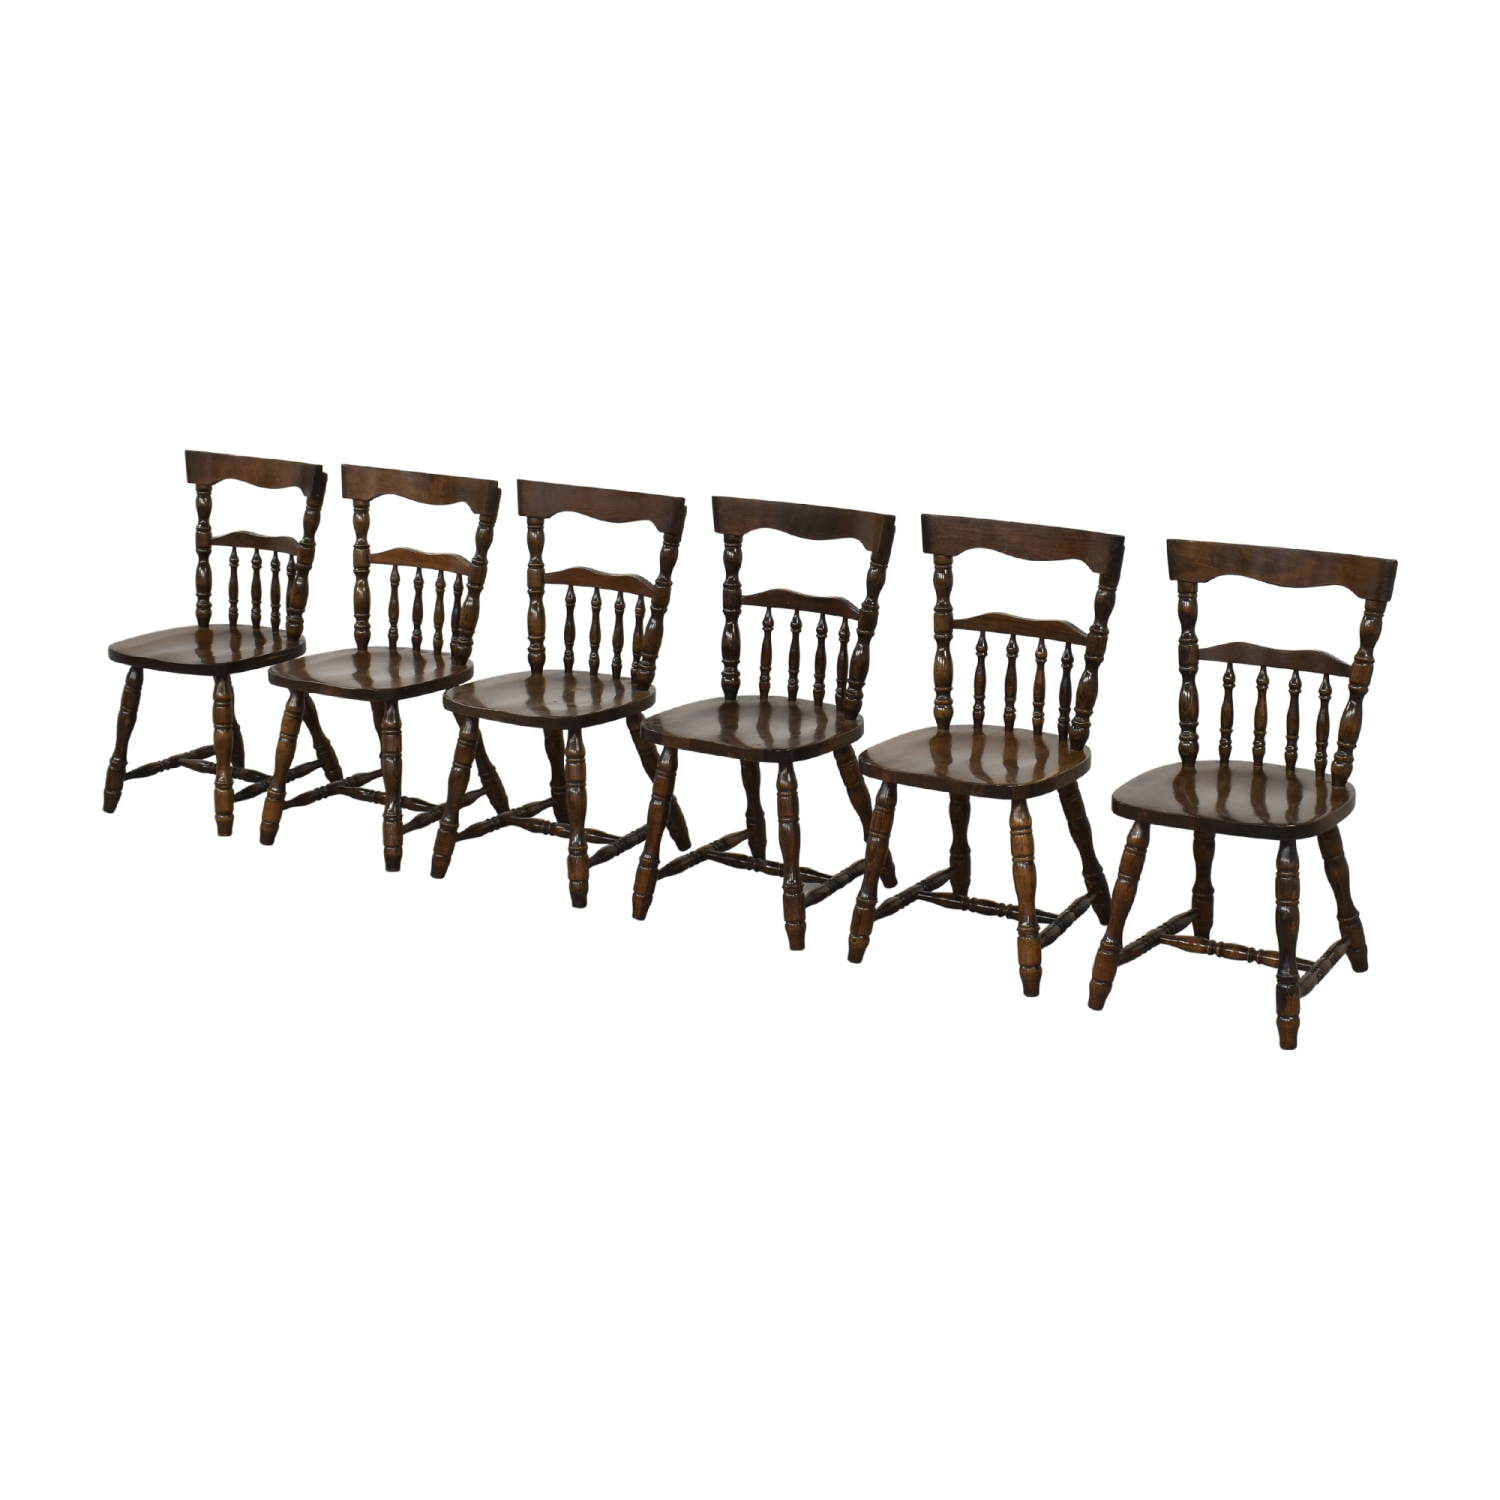  Traditional Dining Chairs  brown